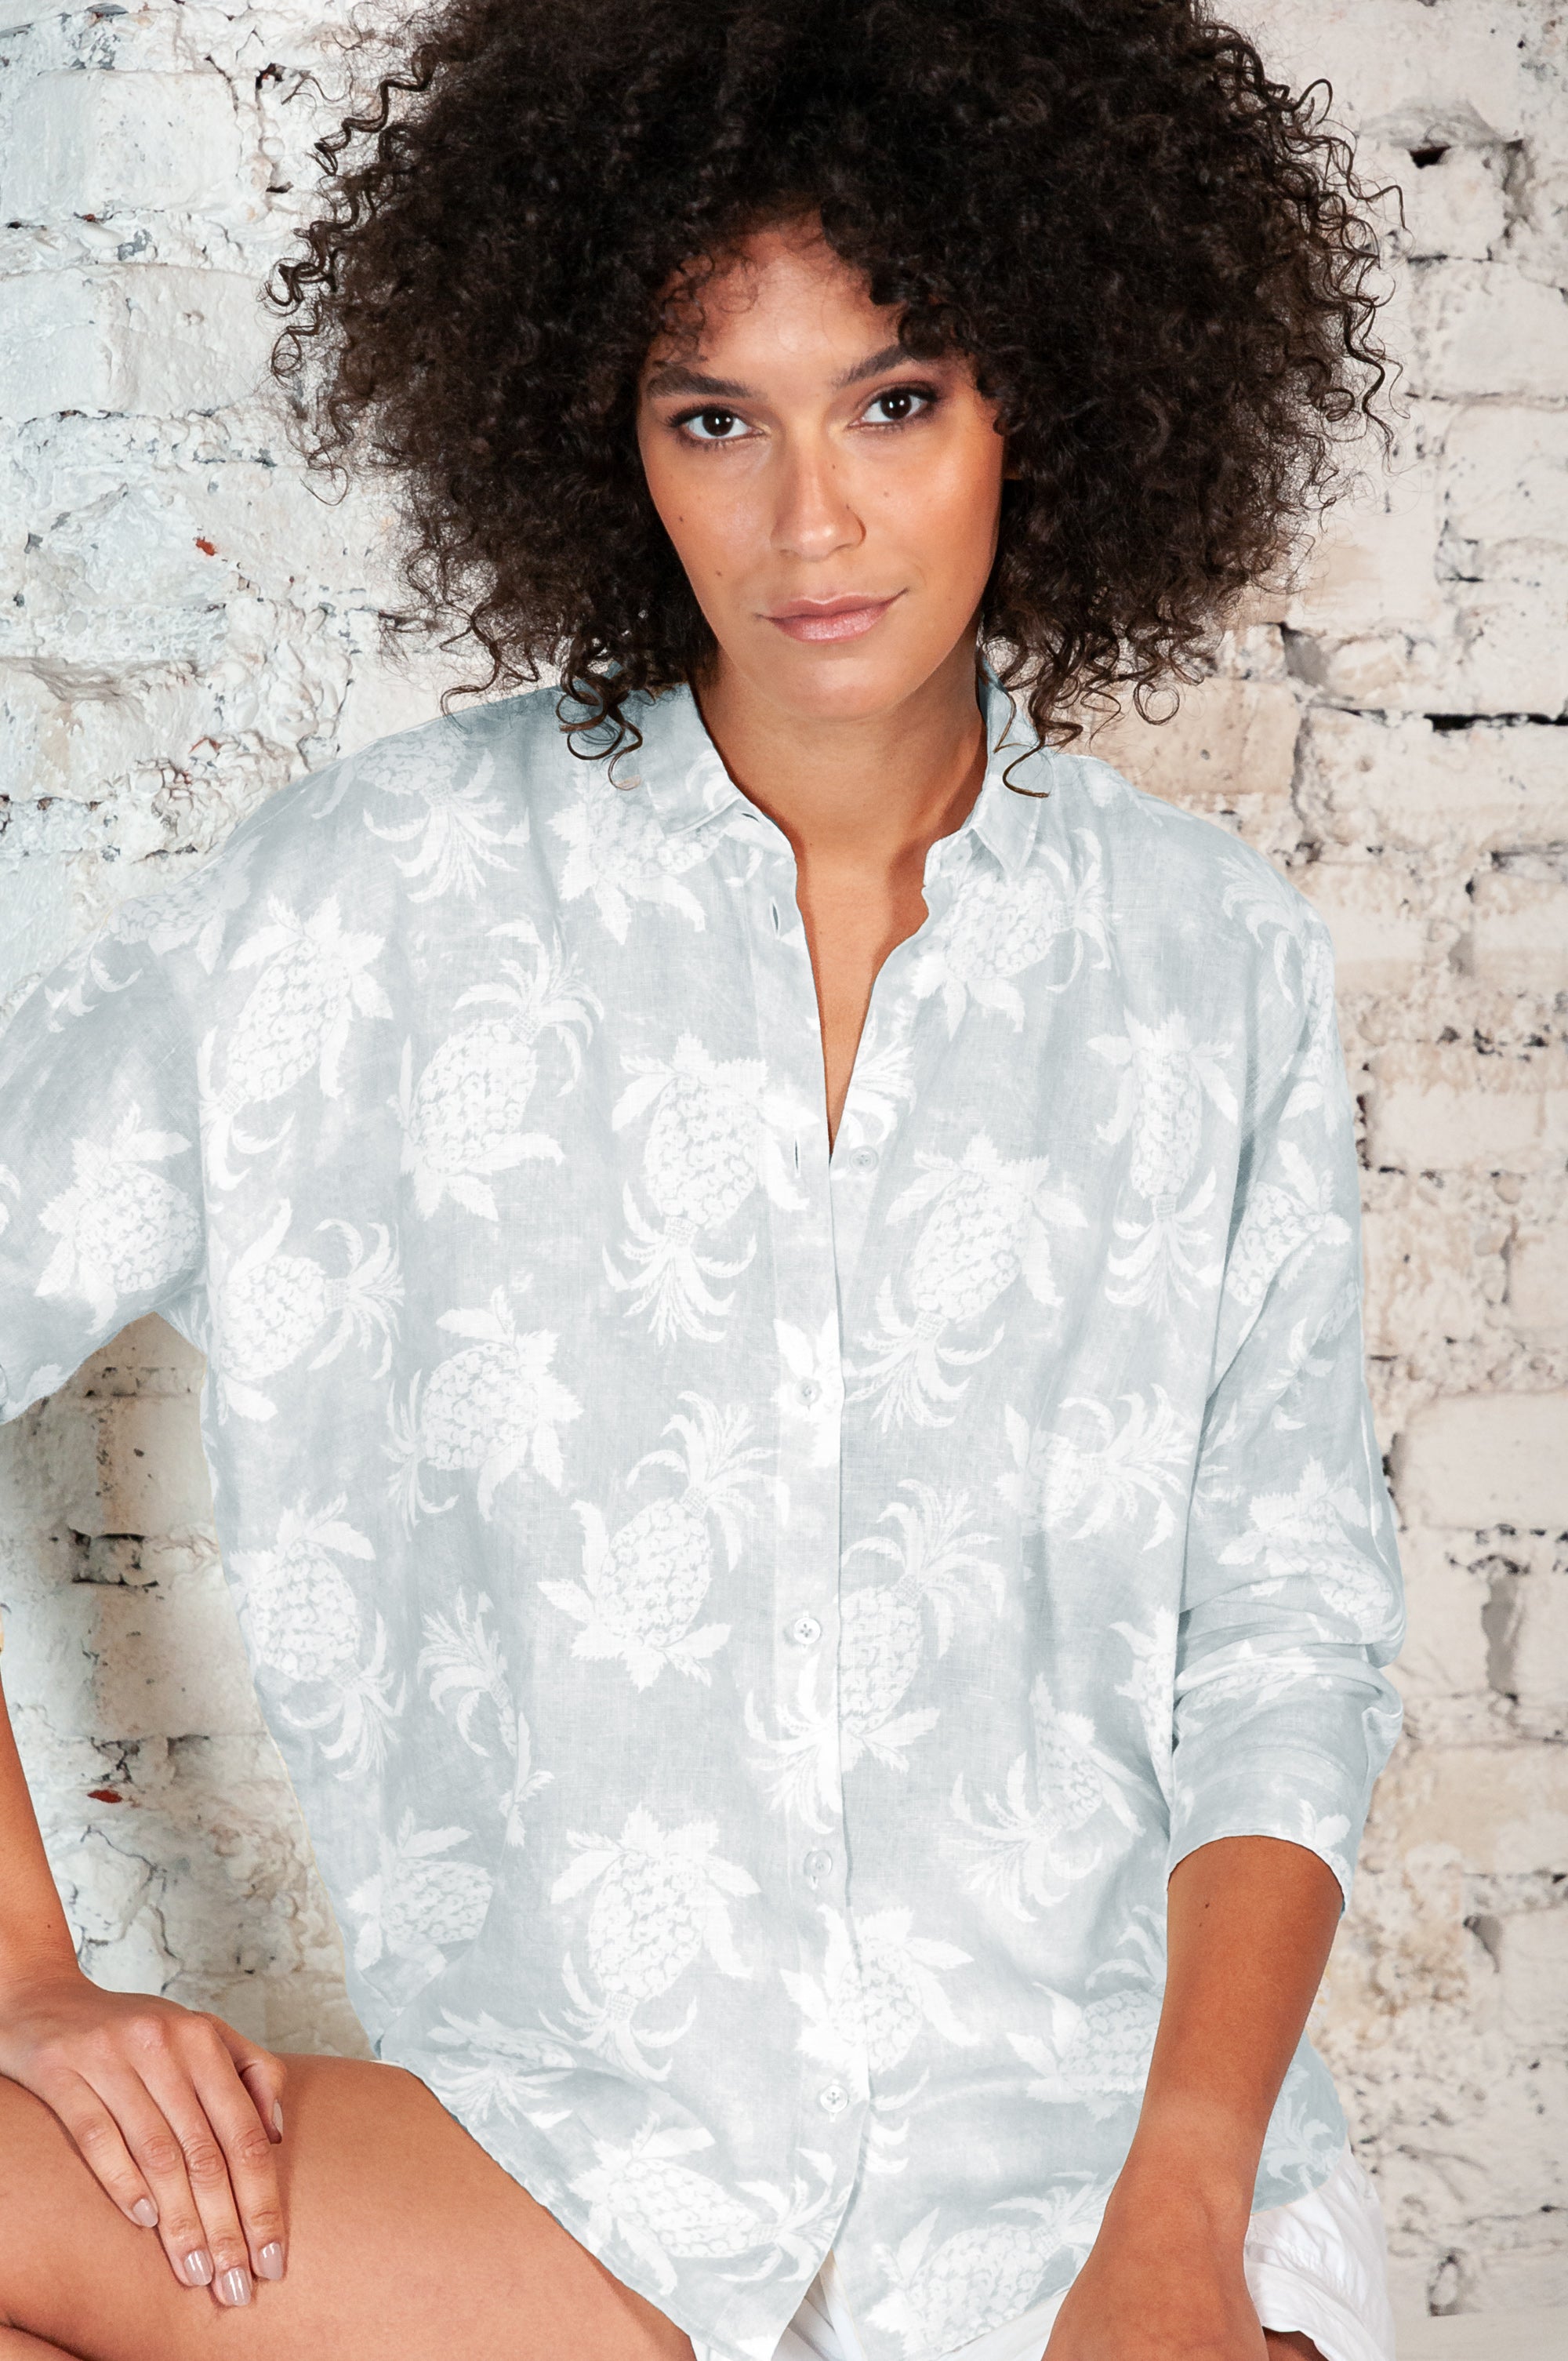 Ollie Blouse in Pineapple Print Linen - Anice